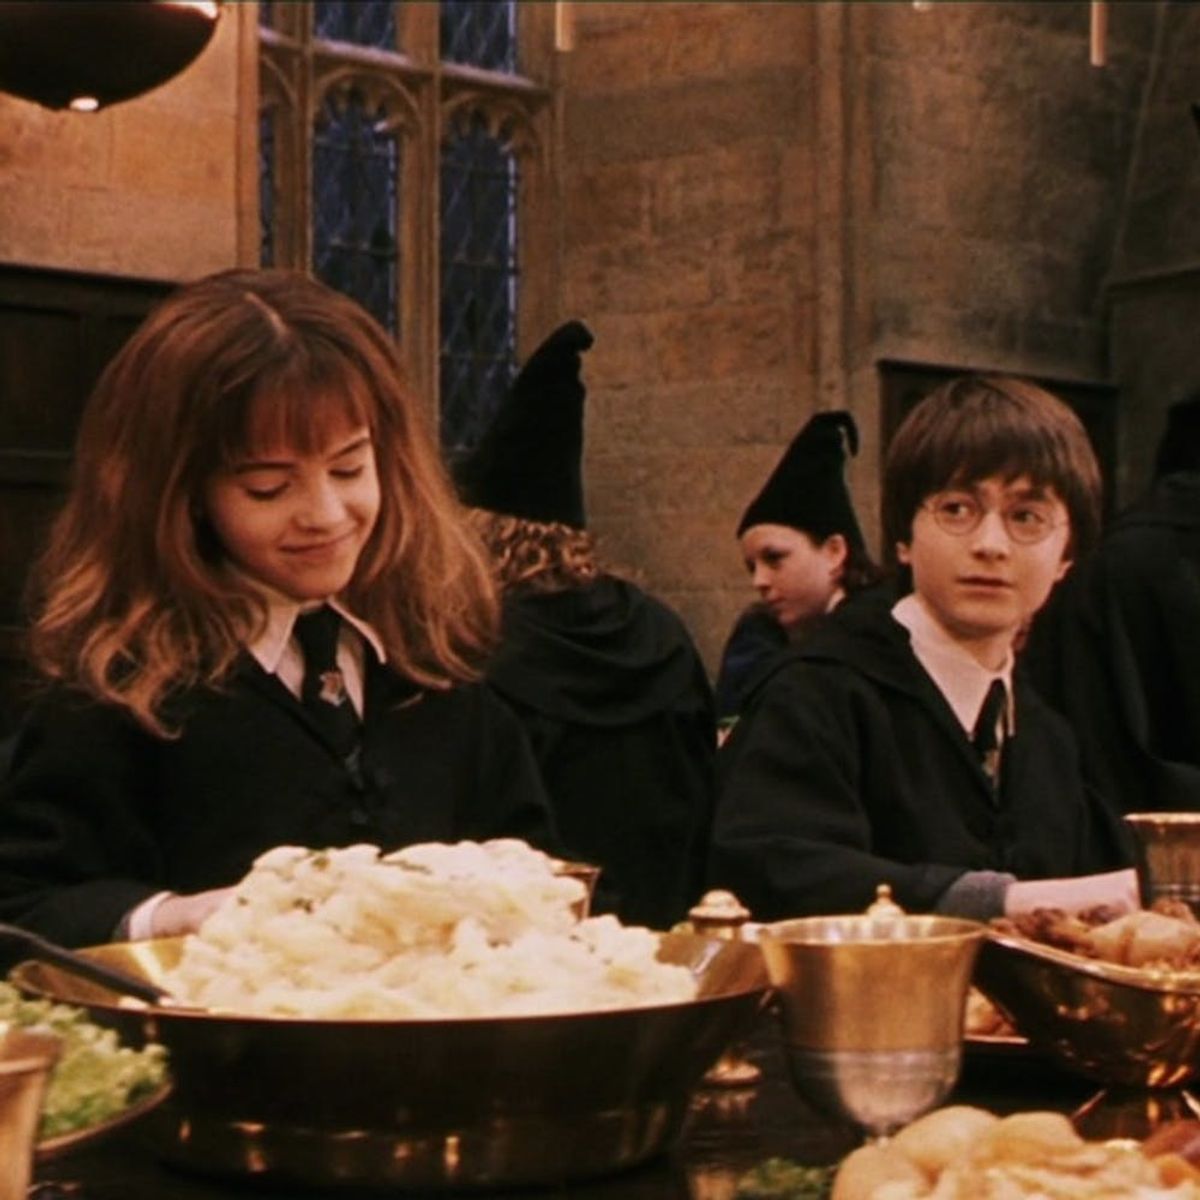 An Exclusive Harry Potter Dining Experience Is Coming This Summer